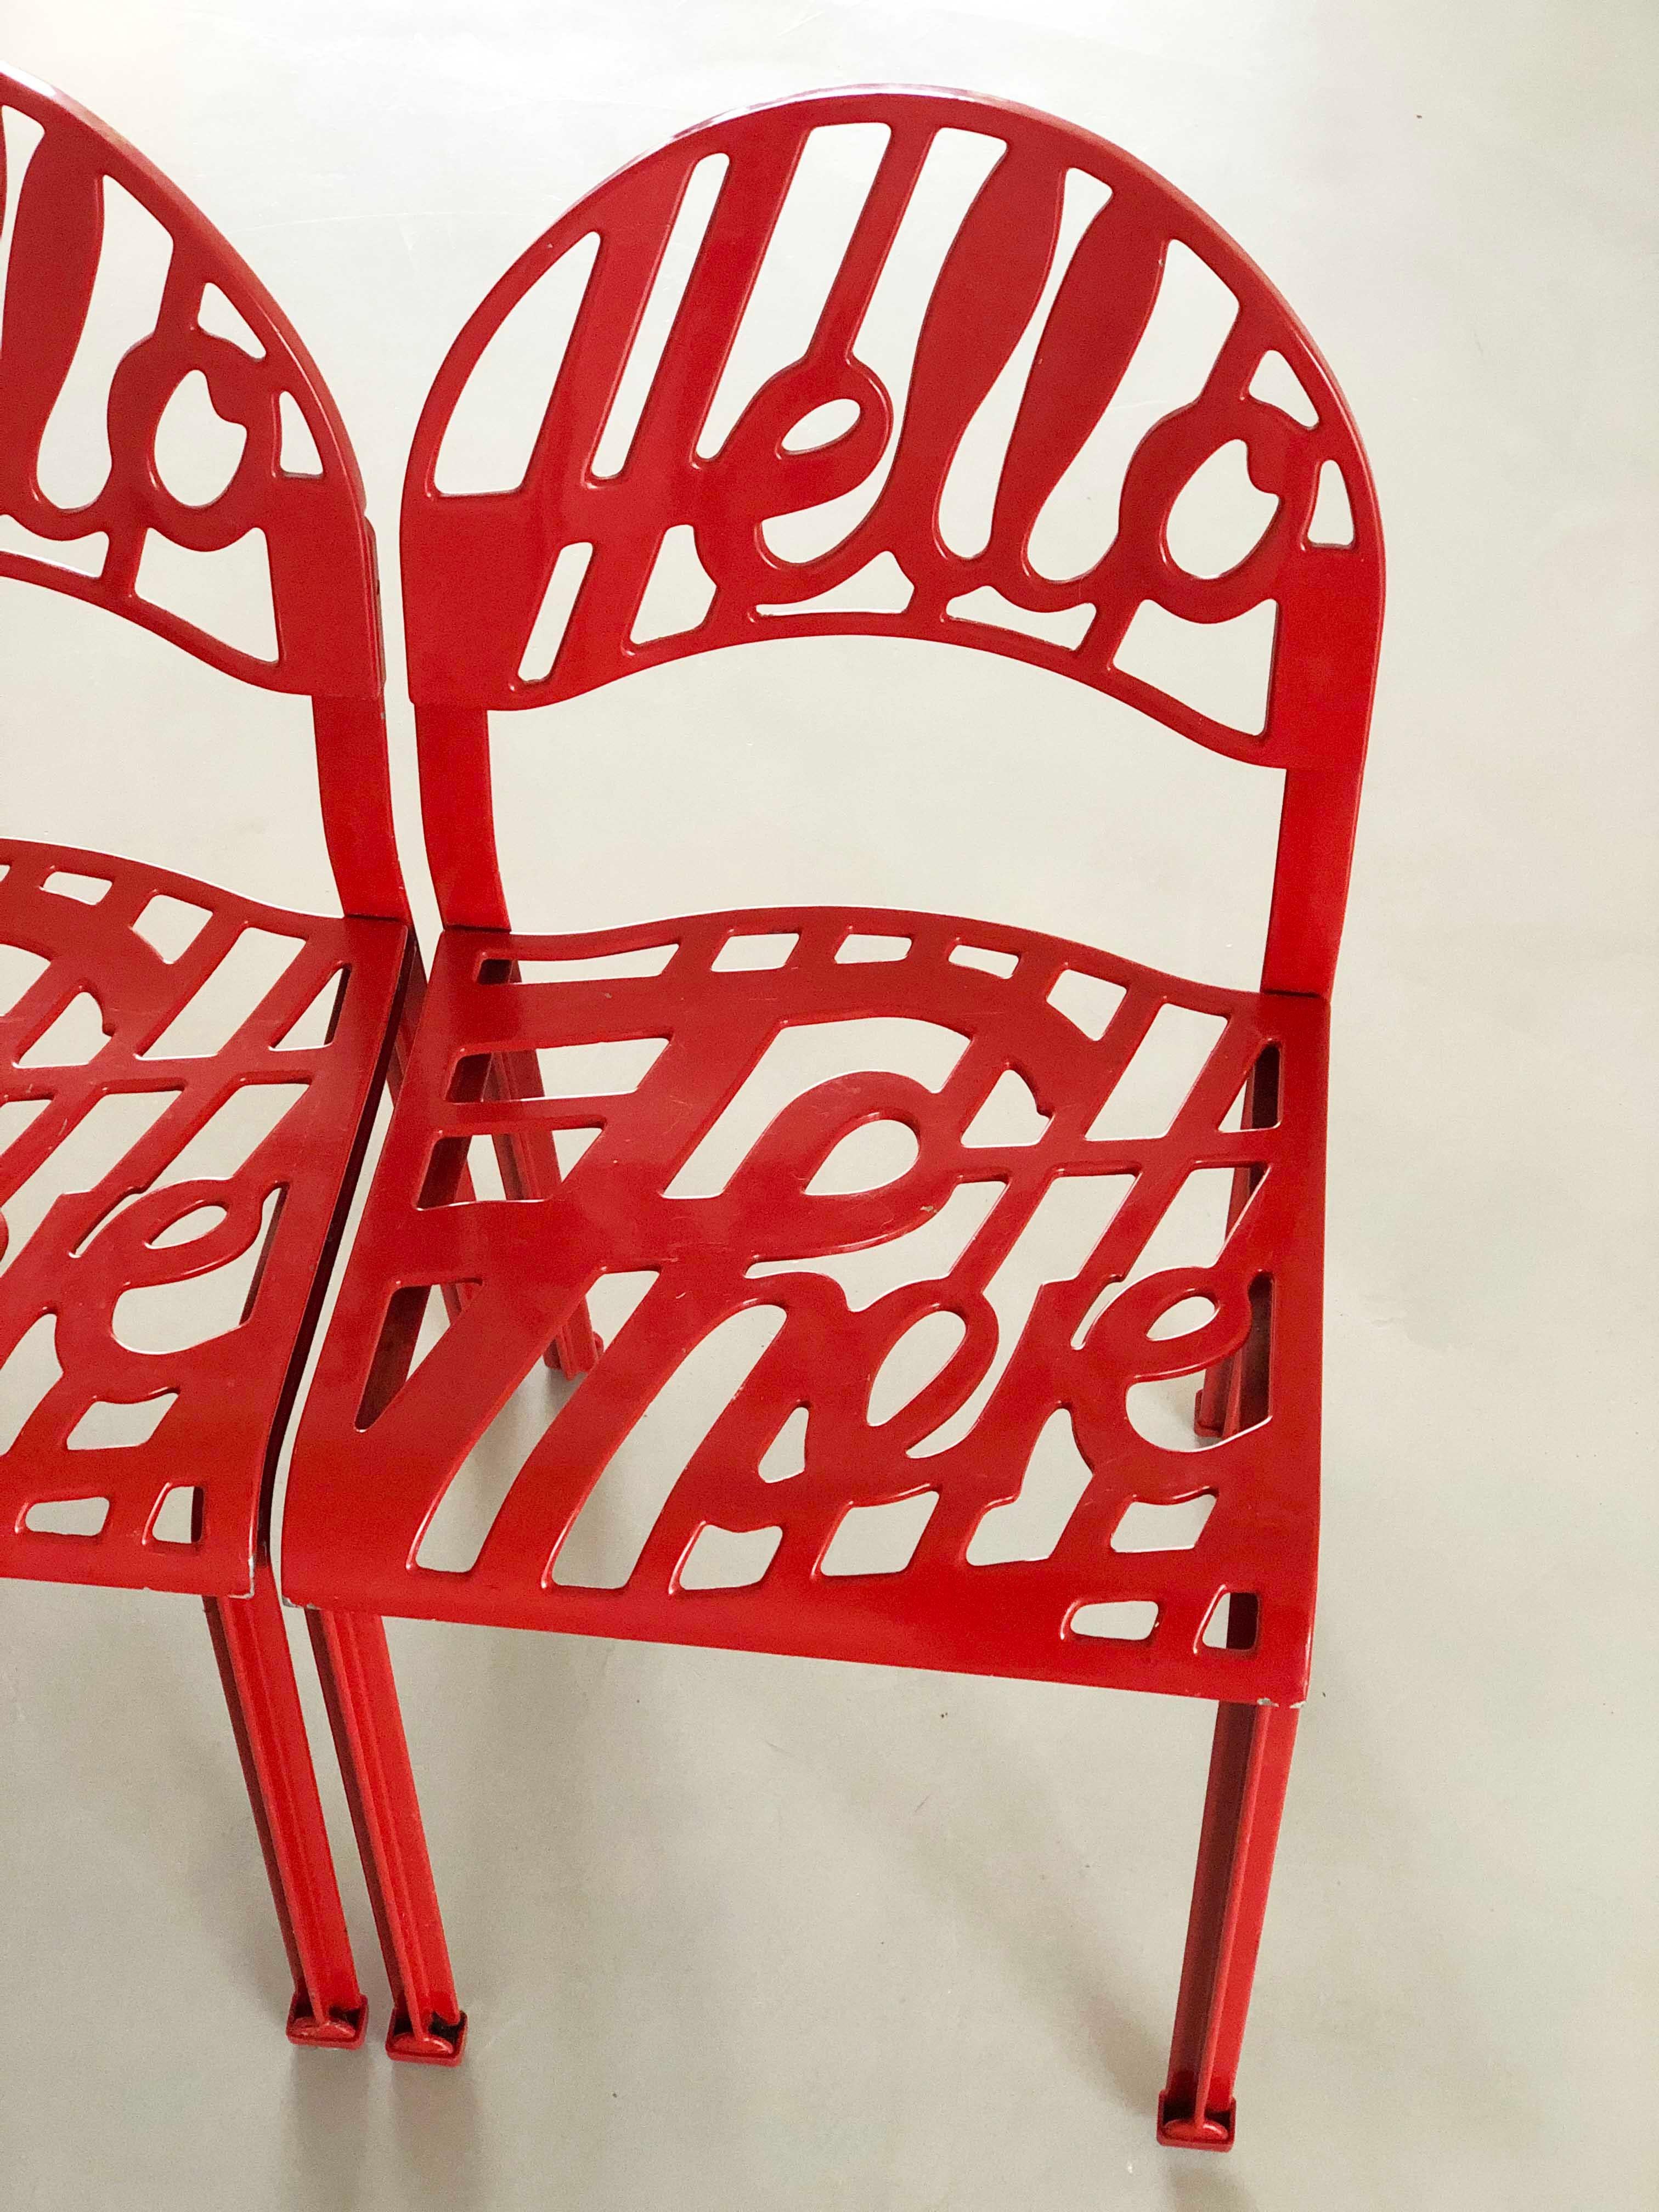 1 vintage Artifort 'Hello There' chairs. An iconic pop art style design by Jeremy Harvey for Artifort. Each are made of cast aluminum then powder coated. This allows the chair to be used both indoors and outdoors. The seats are cast aluminum and red